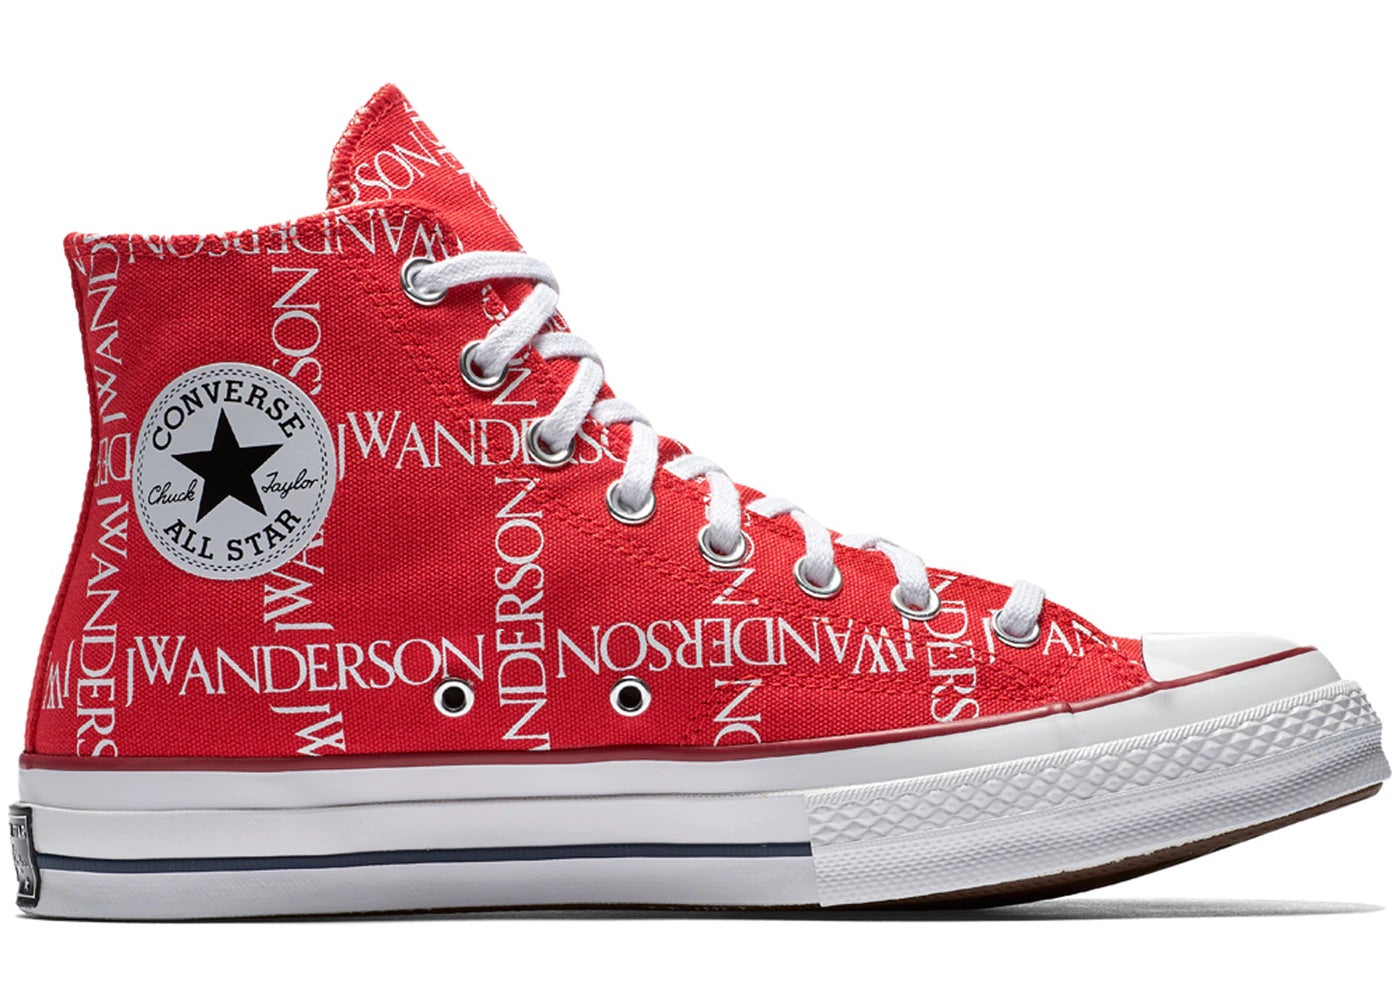 Preowned JW Anderson Chuck Taylor Converse UK10